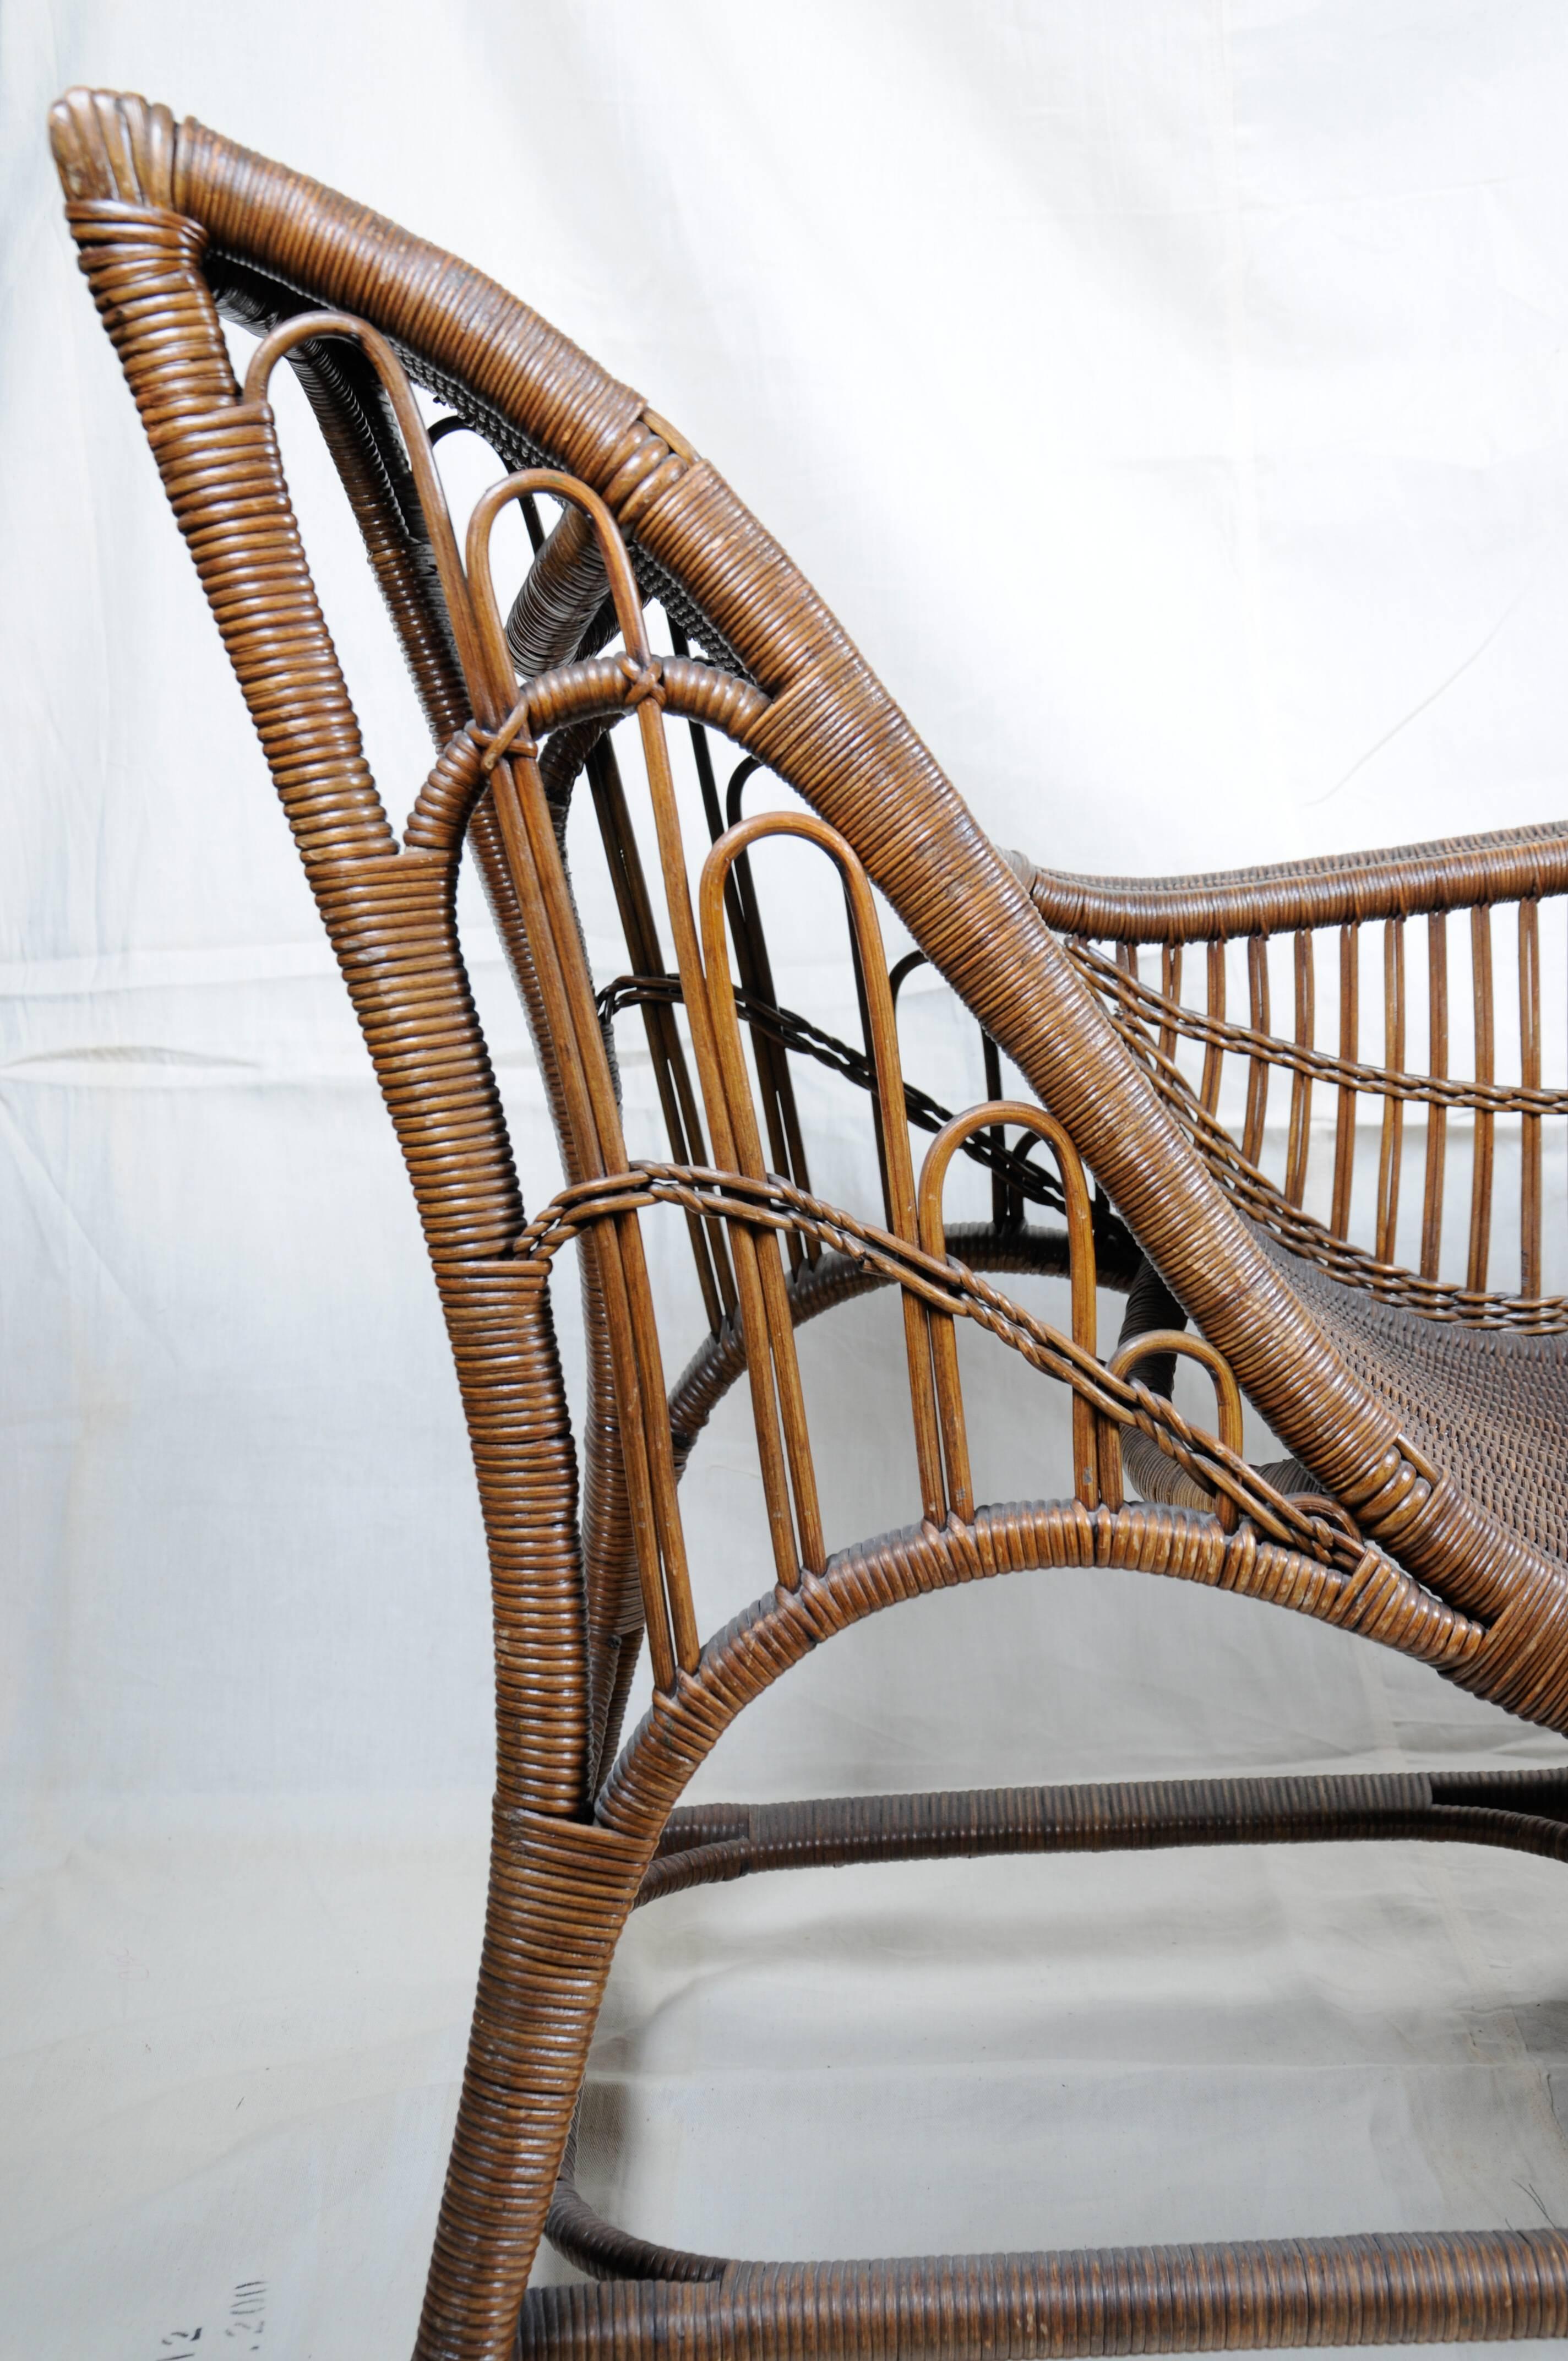 Wicker Chaise.
Chaise by Harry Peach Company, Leicester, England,
early 20th century.
Original logo designed by Paul Woodroffe.
Provenance: Charles Raymond of the Goodyear Tire Company.